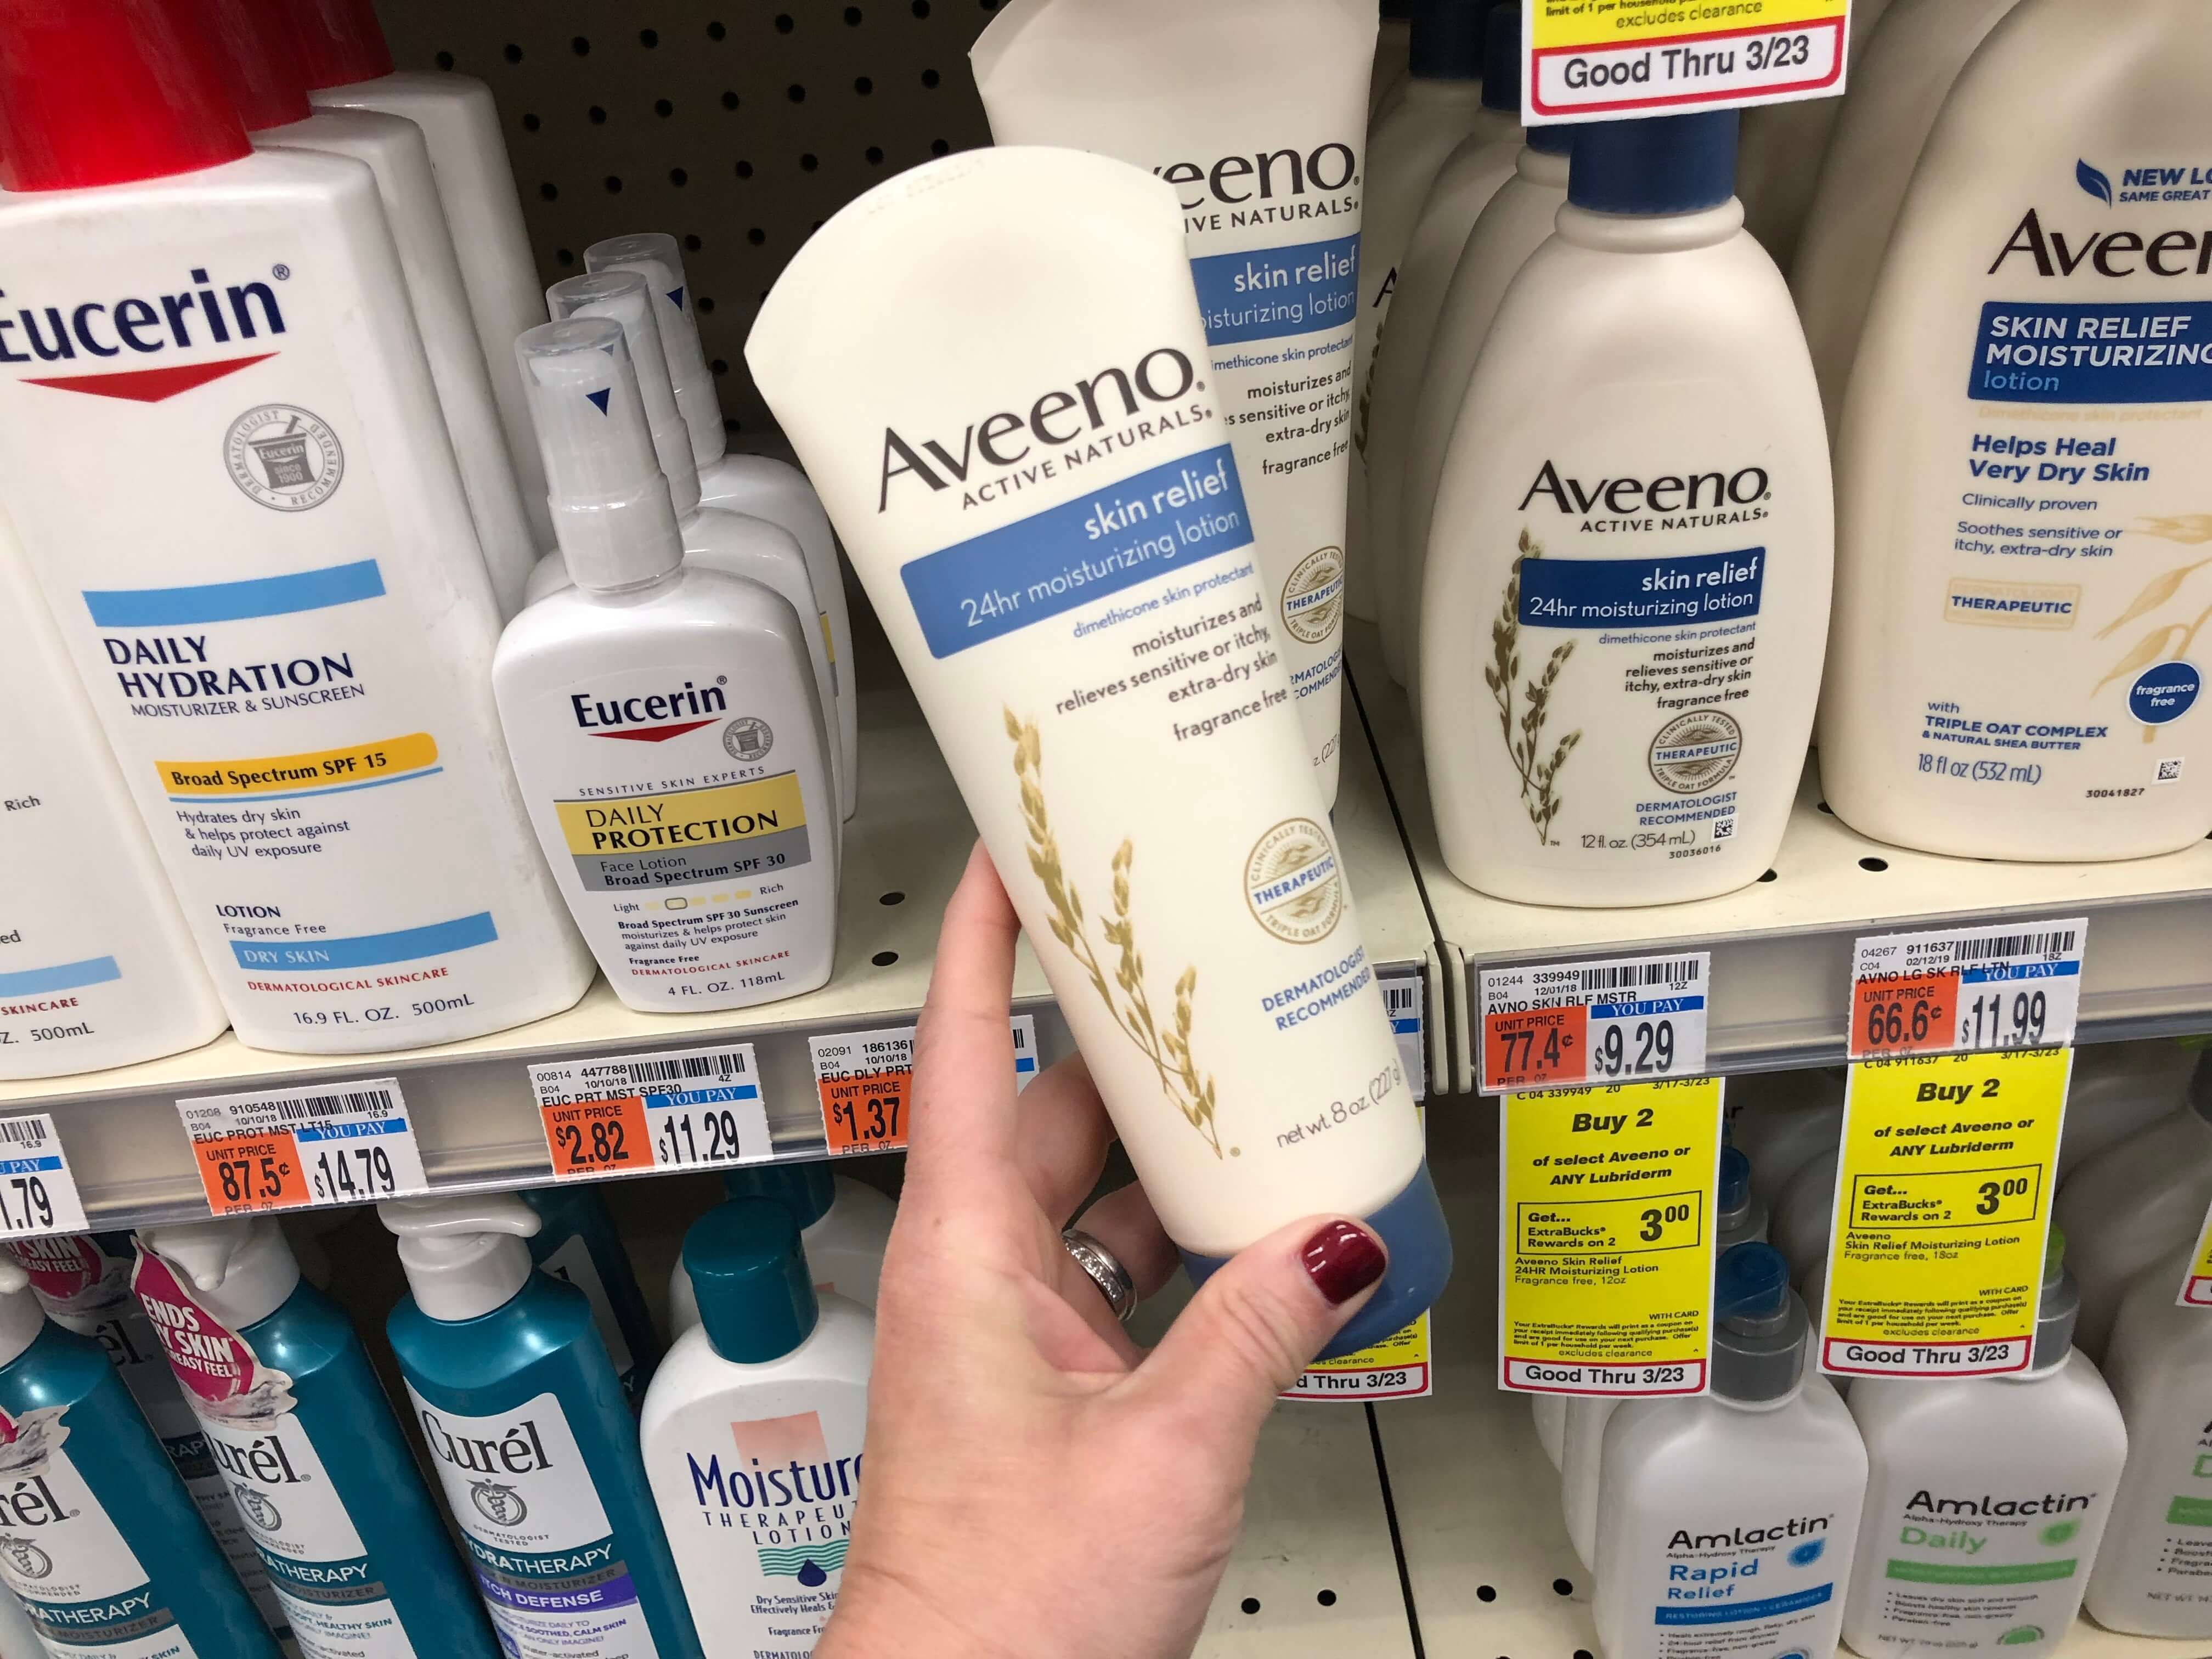 aveeno-skin-relief-moisturizing-lotion-as-low-as-0-49-at-cvs-ibotta